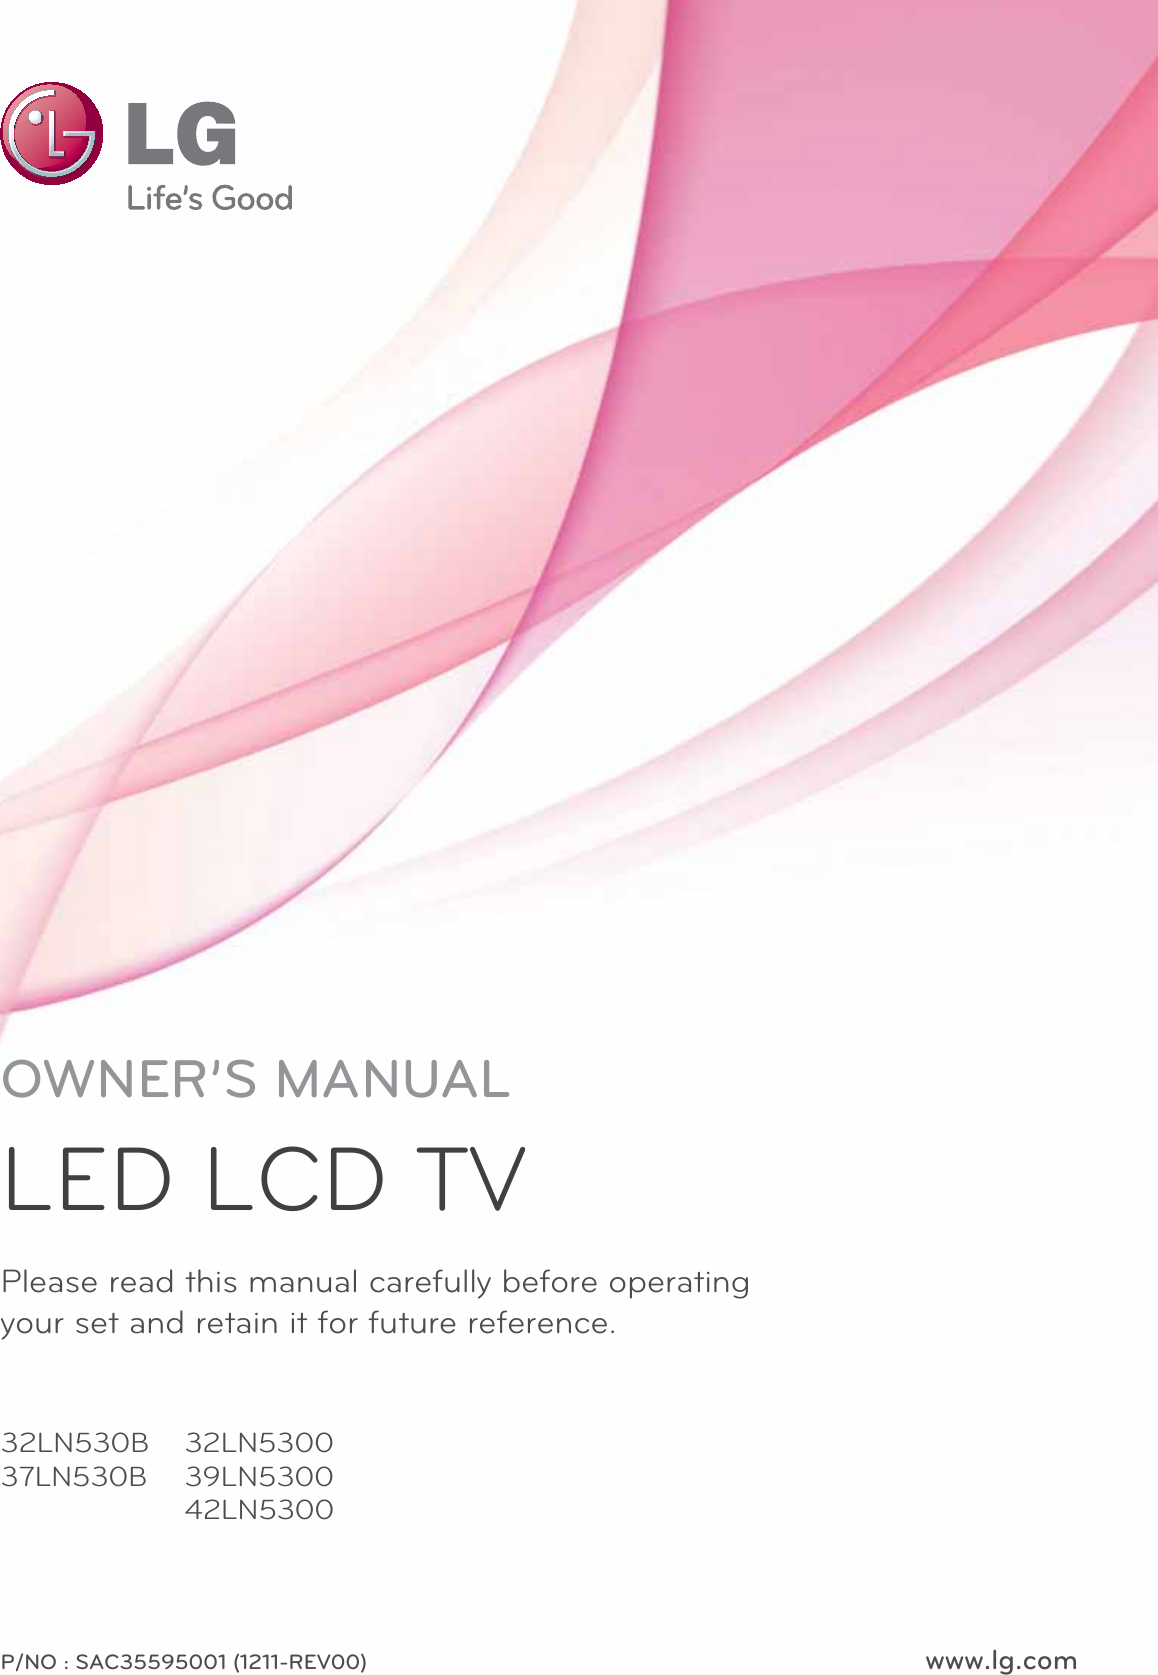 www.lg.comPlease read this manual carefully before operating your set and retain it for future reference.P/NO : SAC35595001 (1211-REV00)OWNER’S MANUALLED LCD TV32LN530B 37LN530B32LN5300 39LN5300 42LN5300 